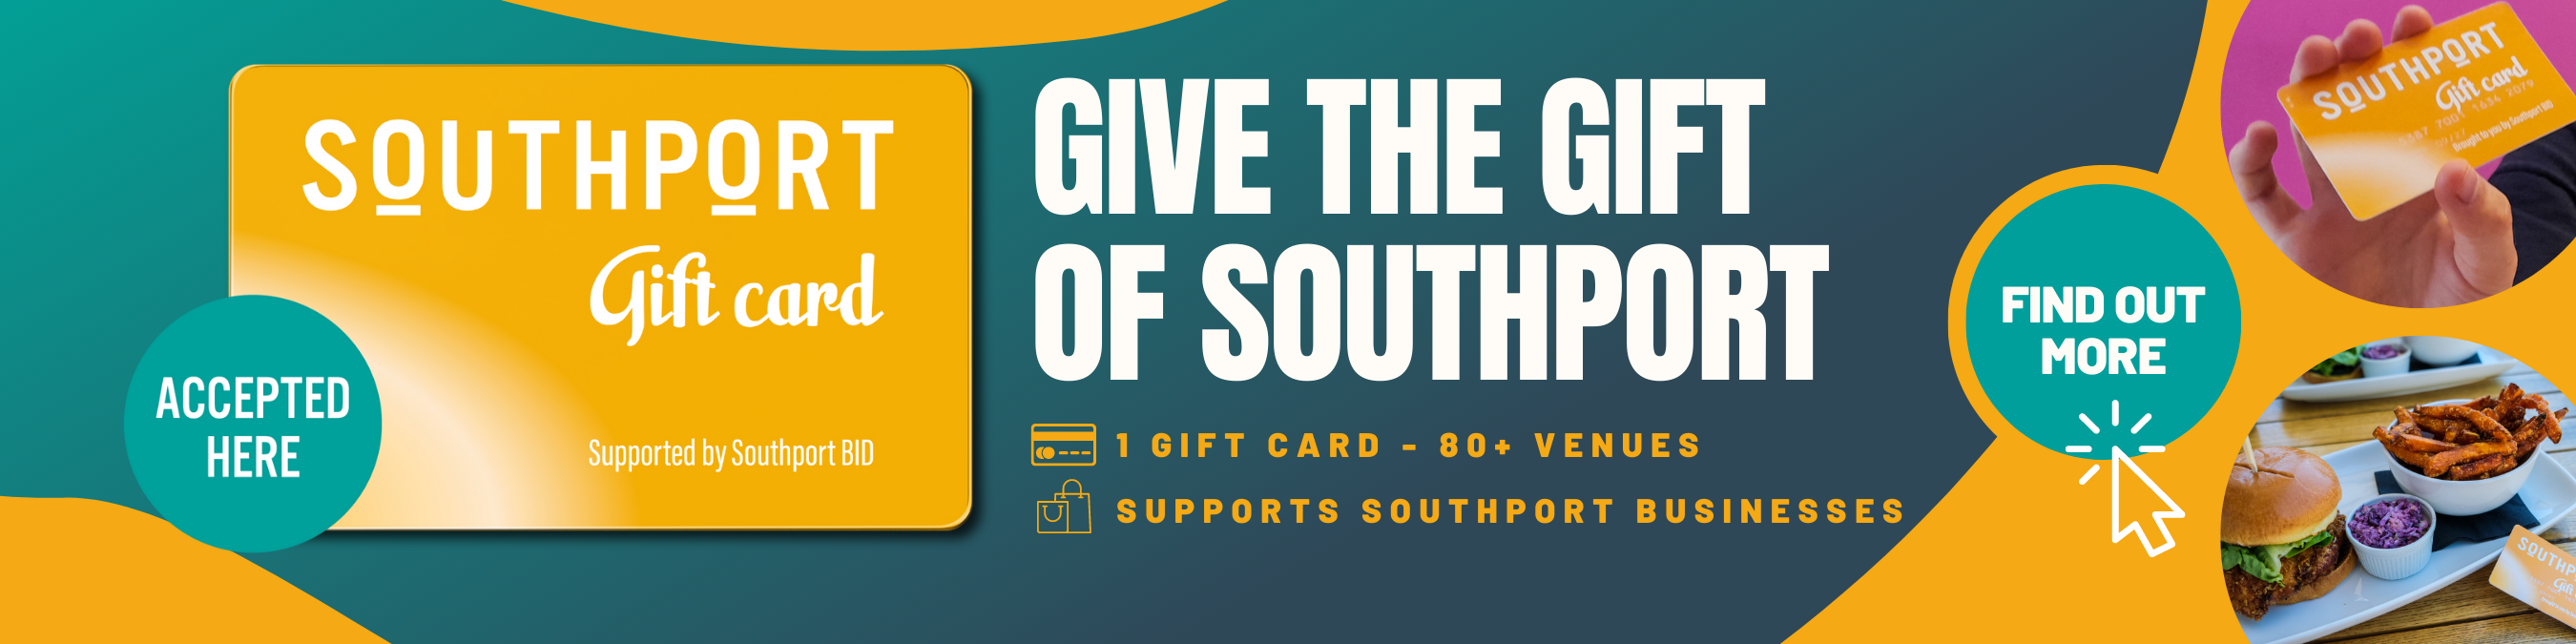 To buy your Southport Gift Card please visit www.southportgiftcard.co.uk